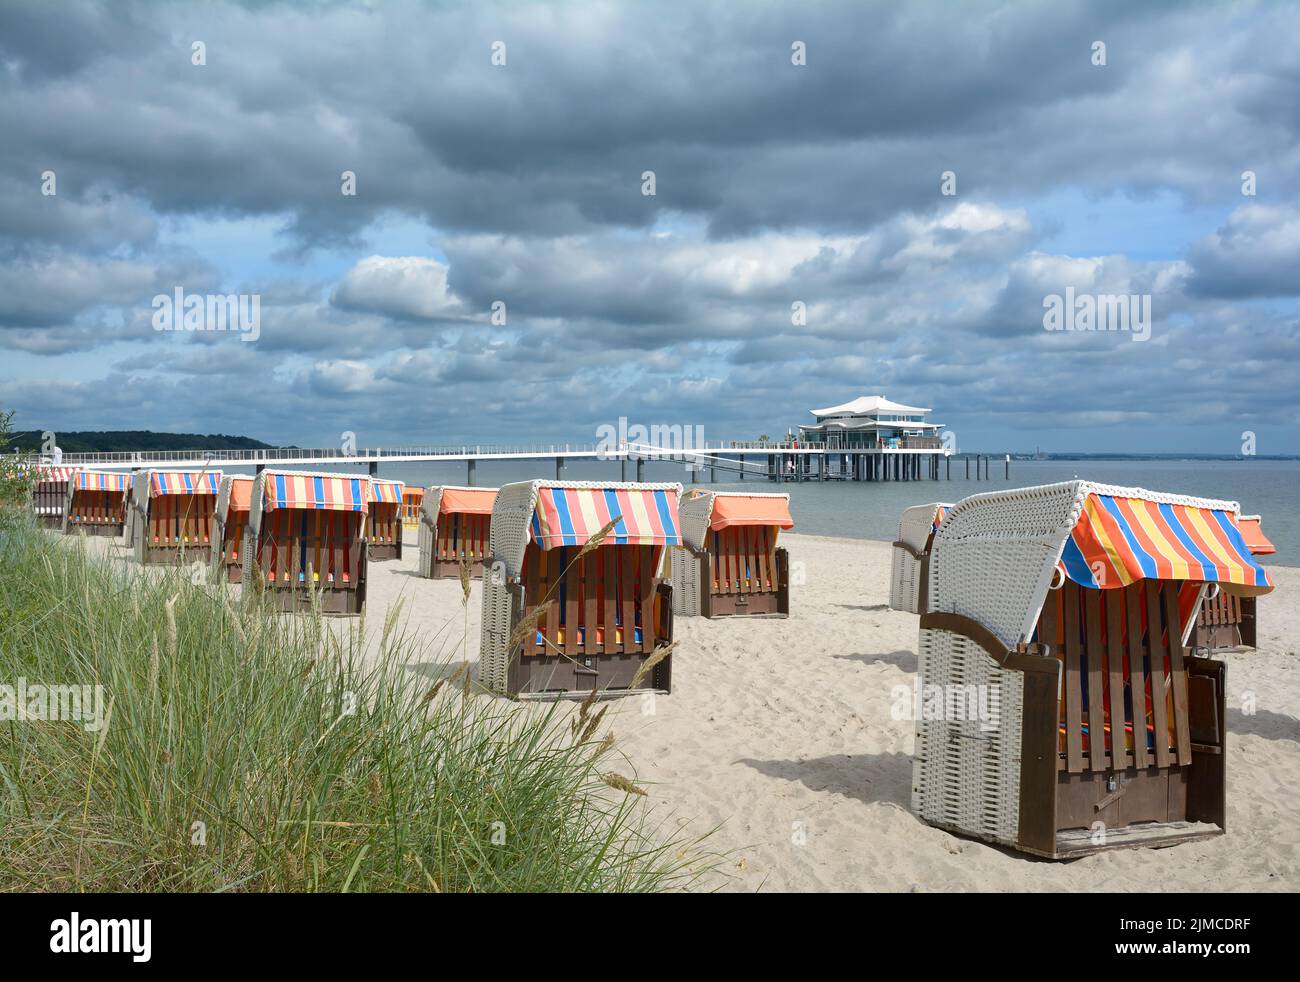 Beach and Pier of Timmendorfer Strand,baltic Sea,Schleswig-Holstein,Germany Stock Photo